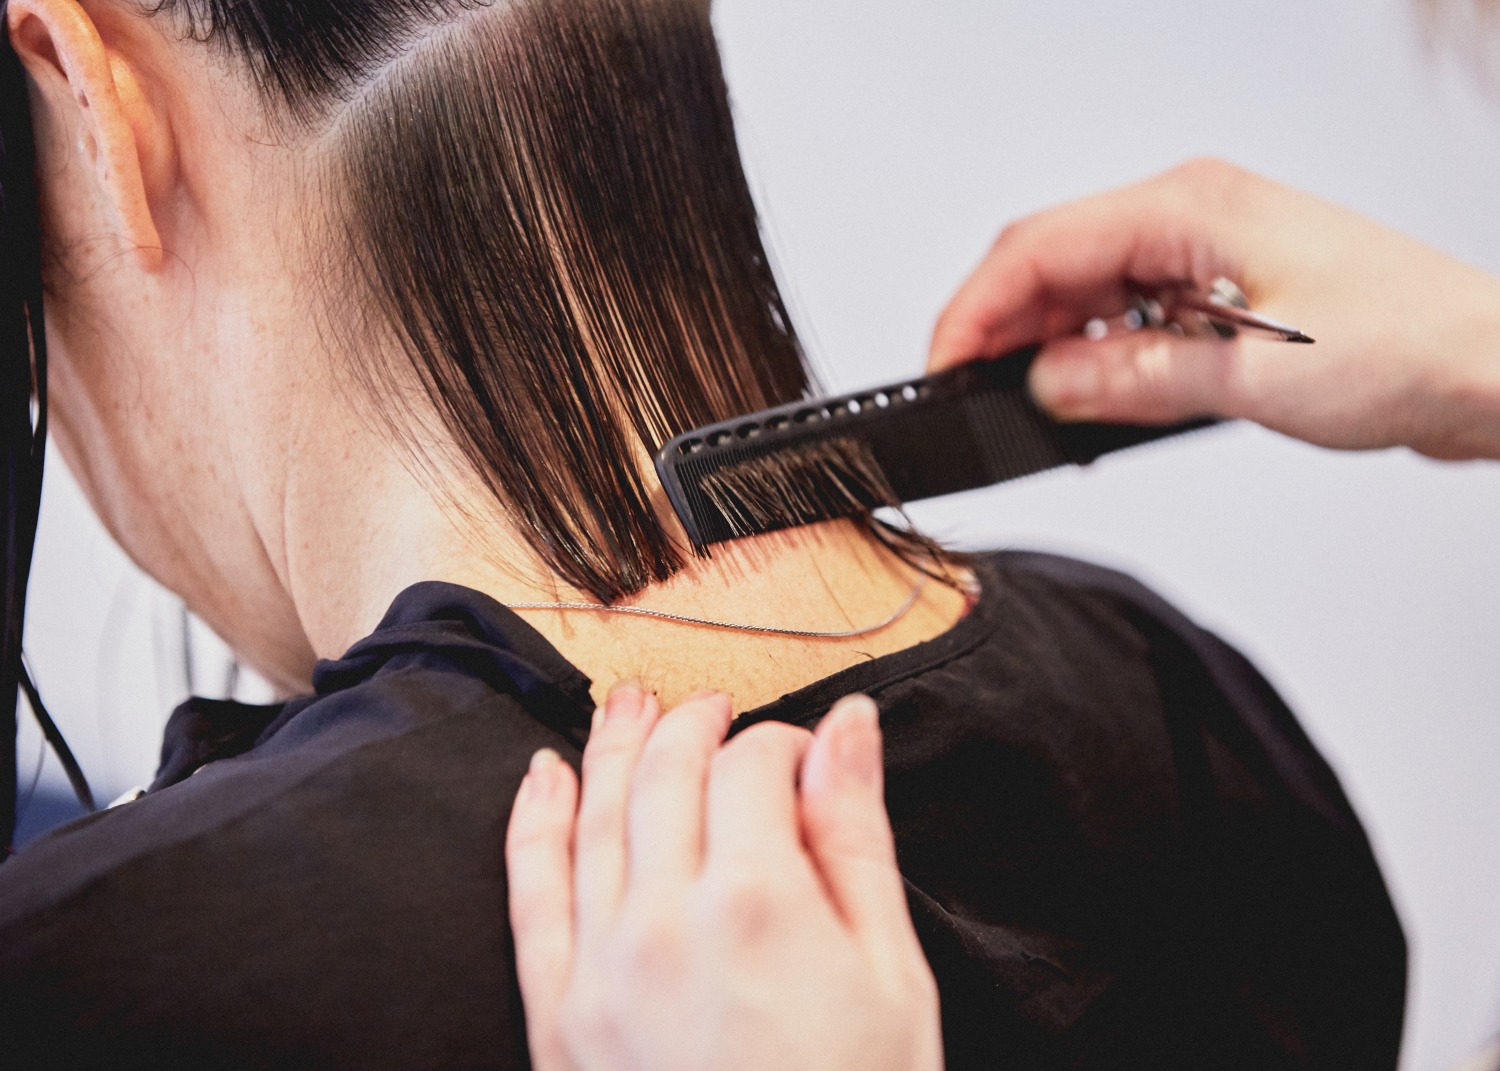 How often should you trim your hair?